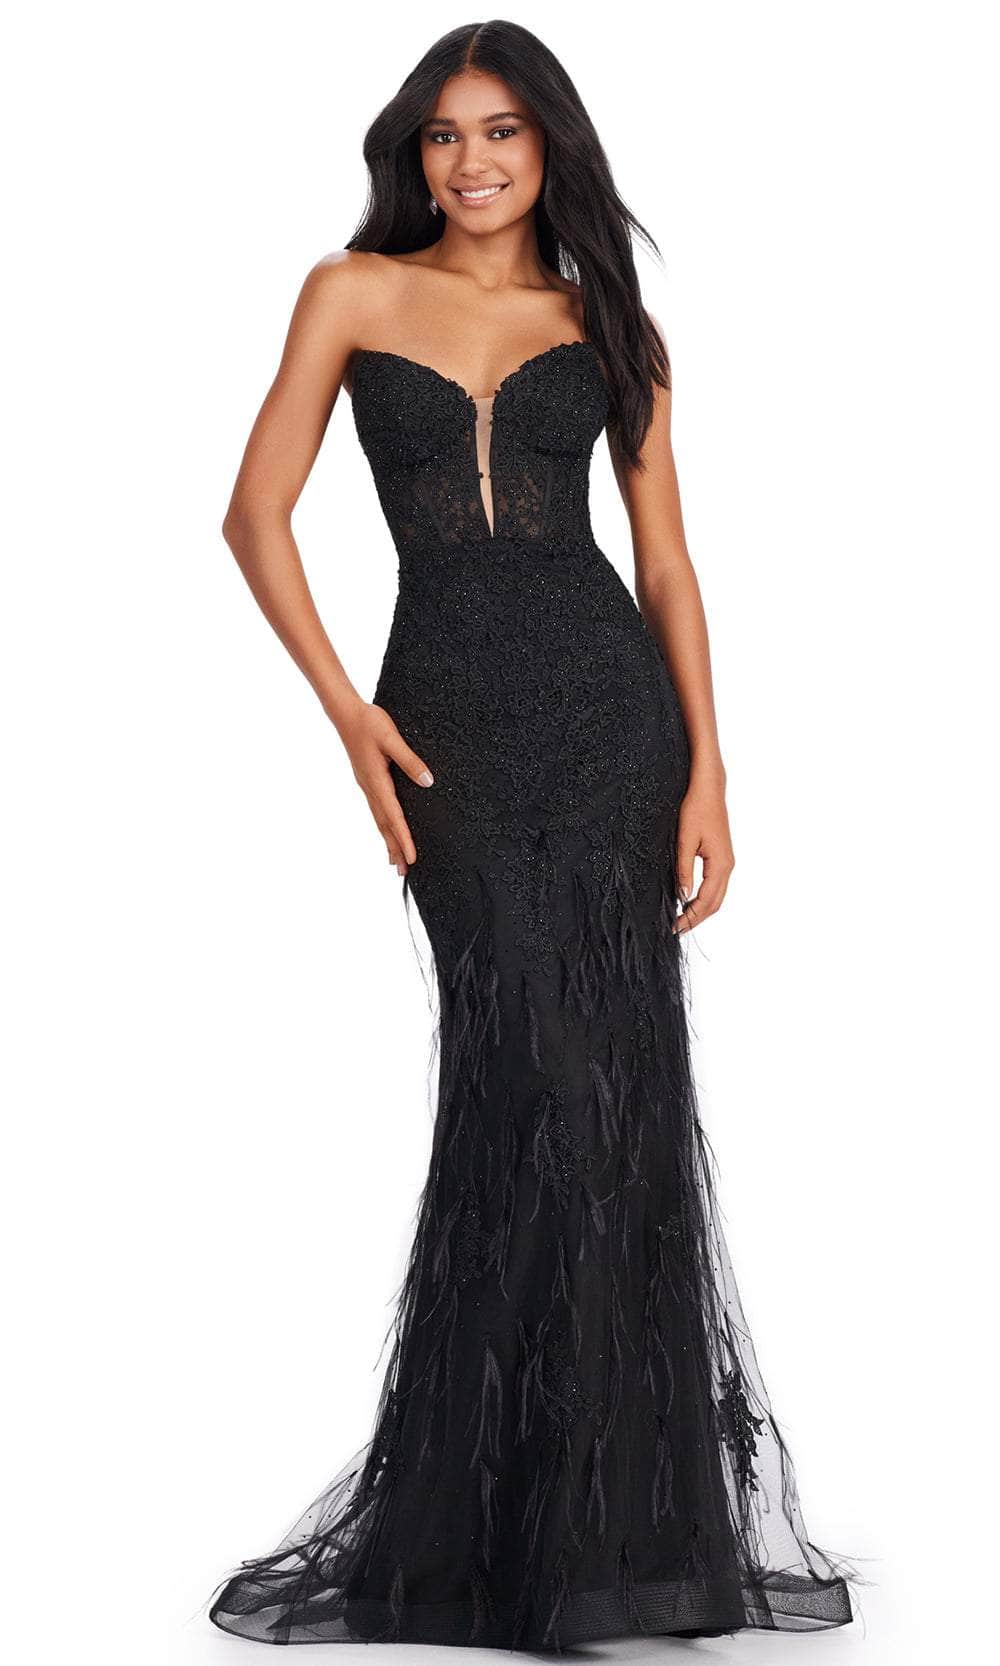 Image of Ashley Lauren 11483 - Plunging Feather Accent Prom Gown